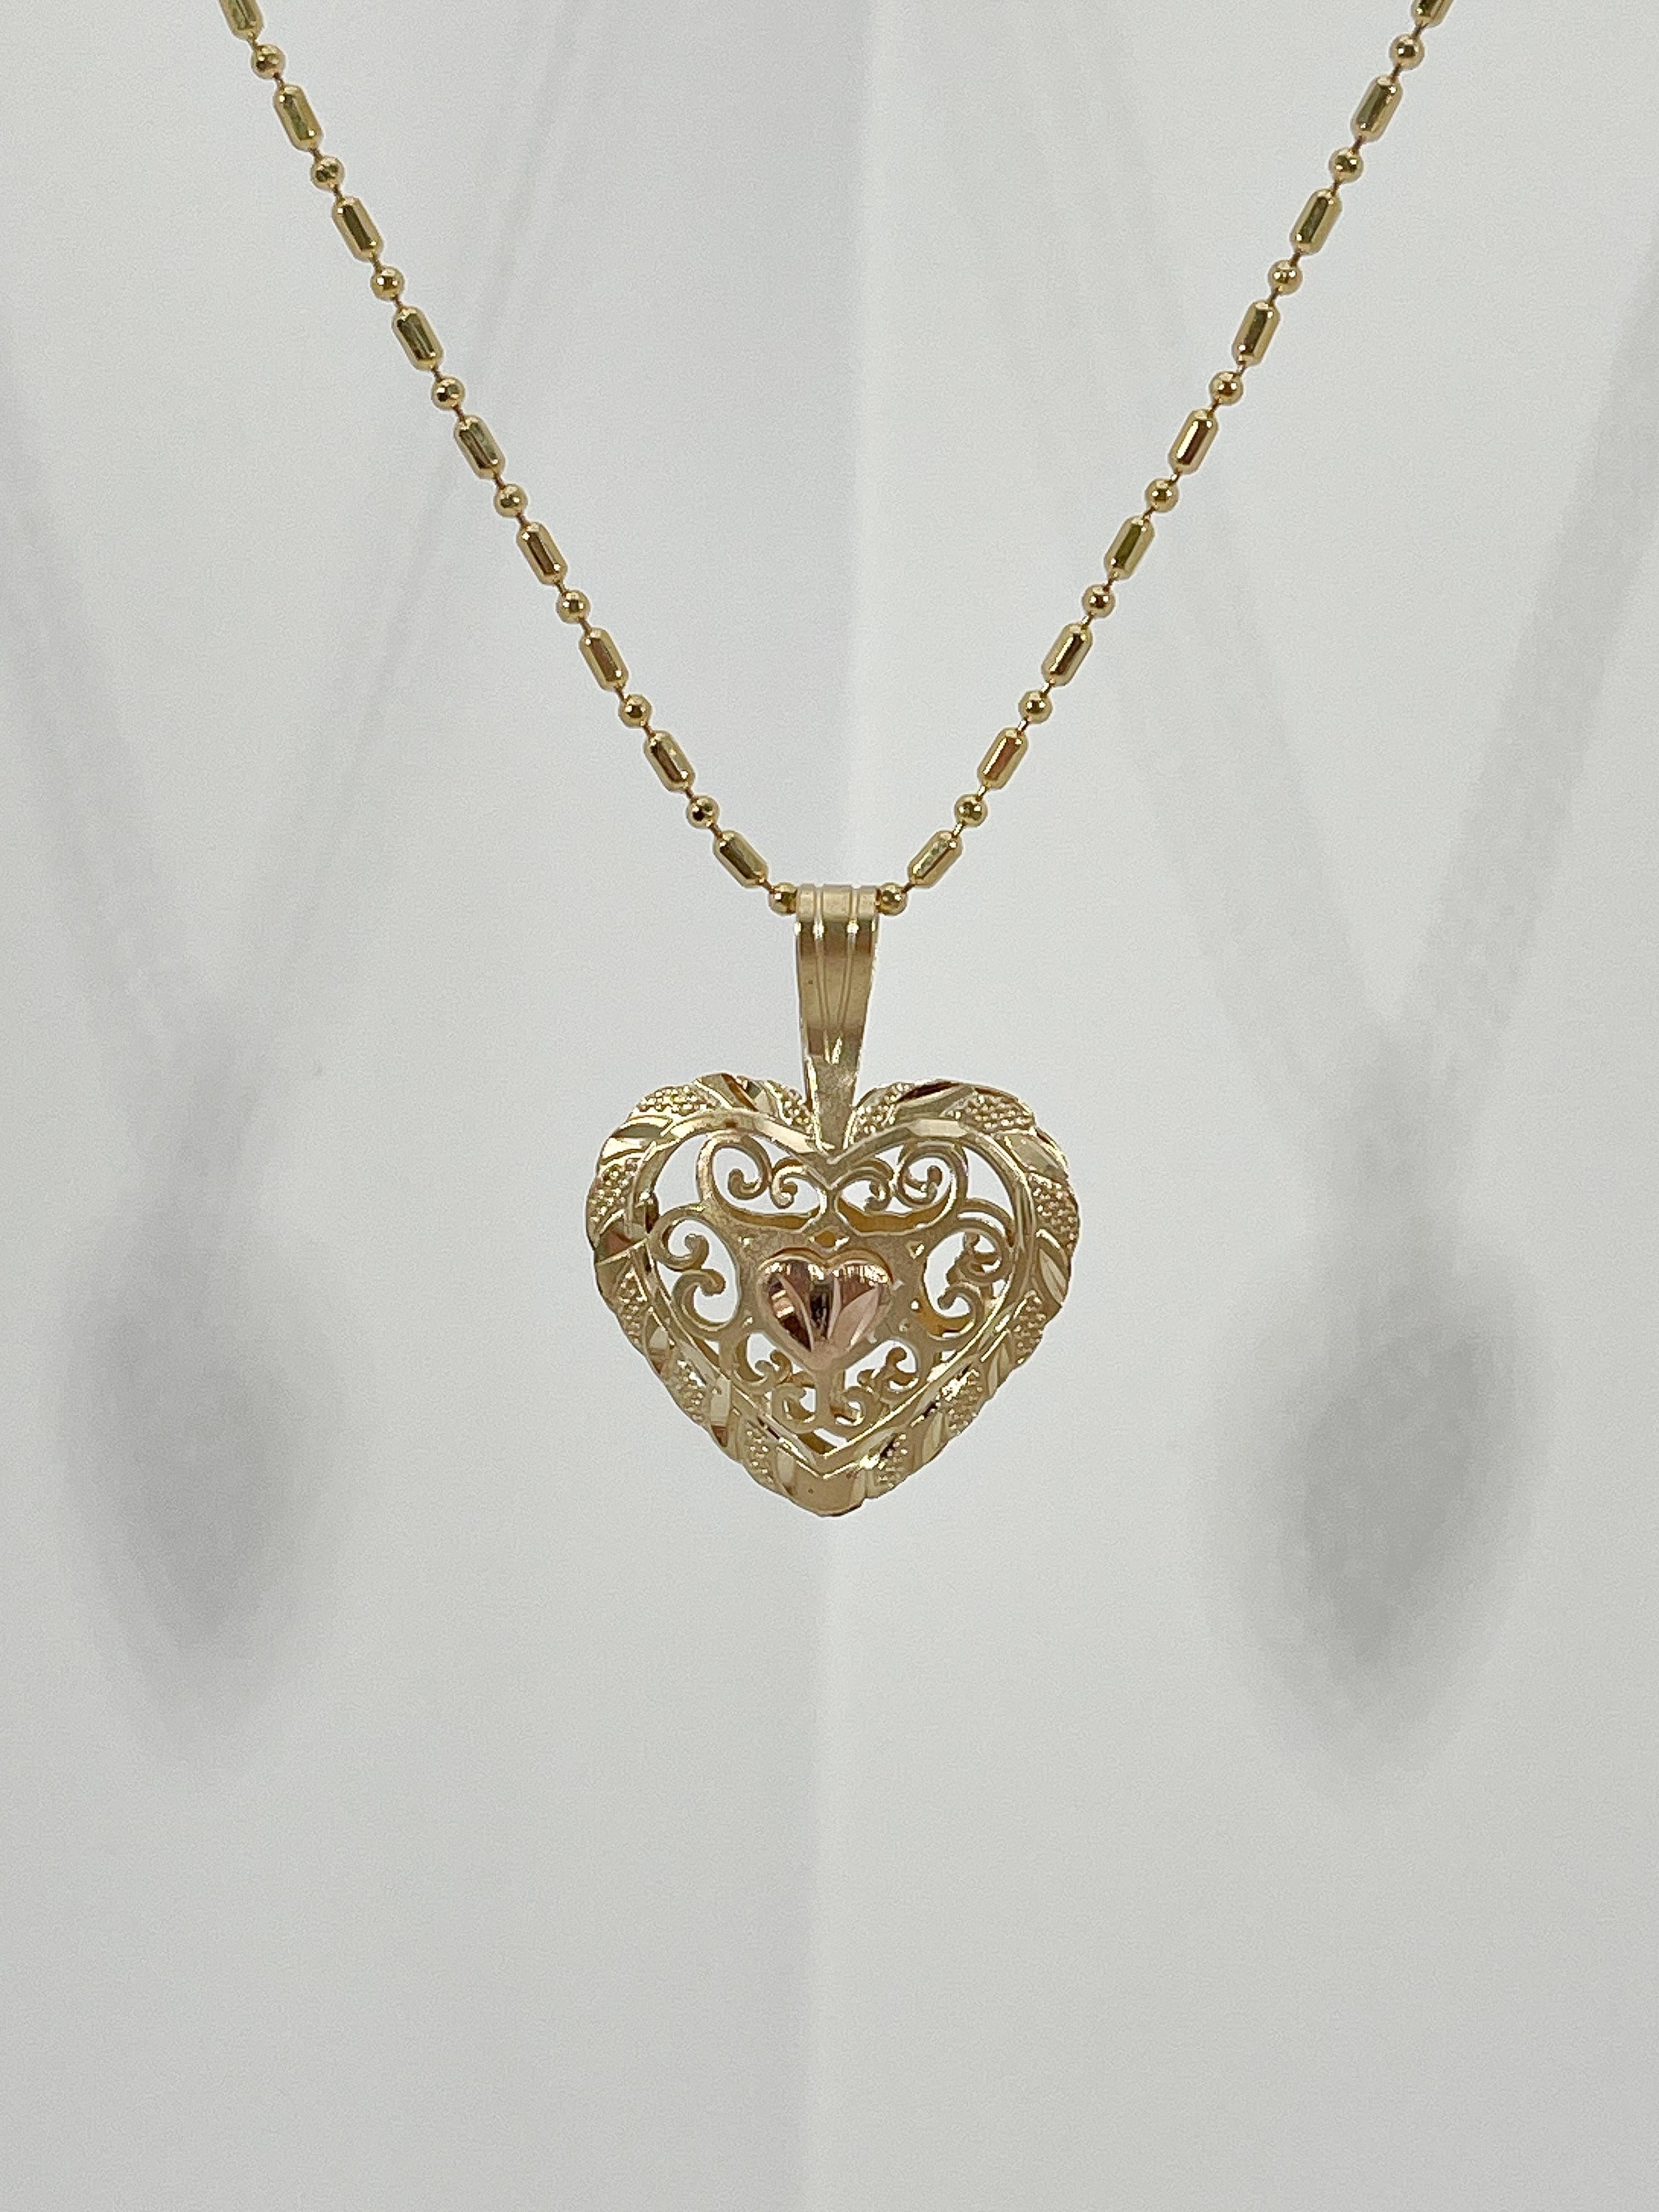 14K Yellow and Rose Gold Filigree Heart Pendant Necklace In Excellent Condition For Sale In Stuart, FL